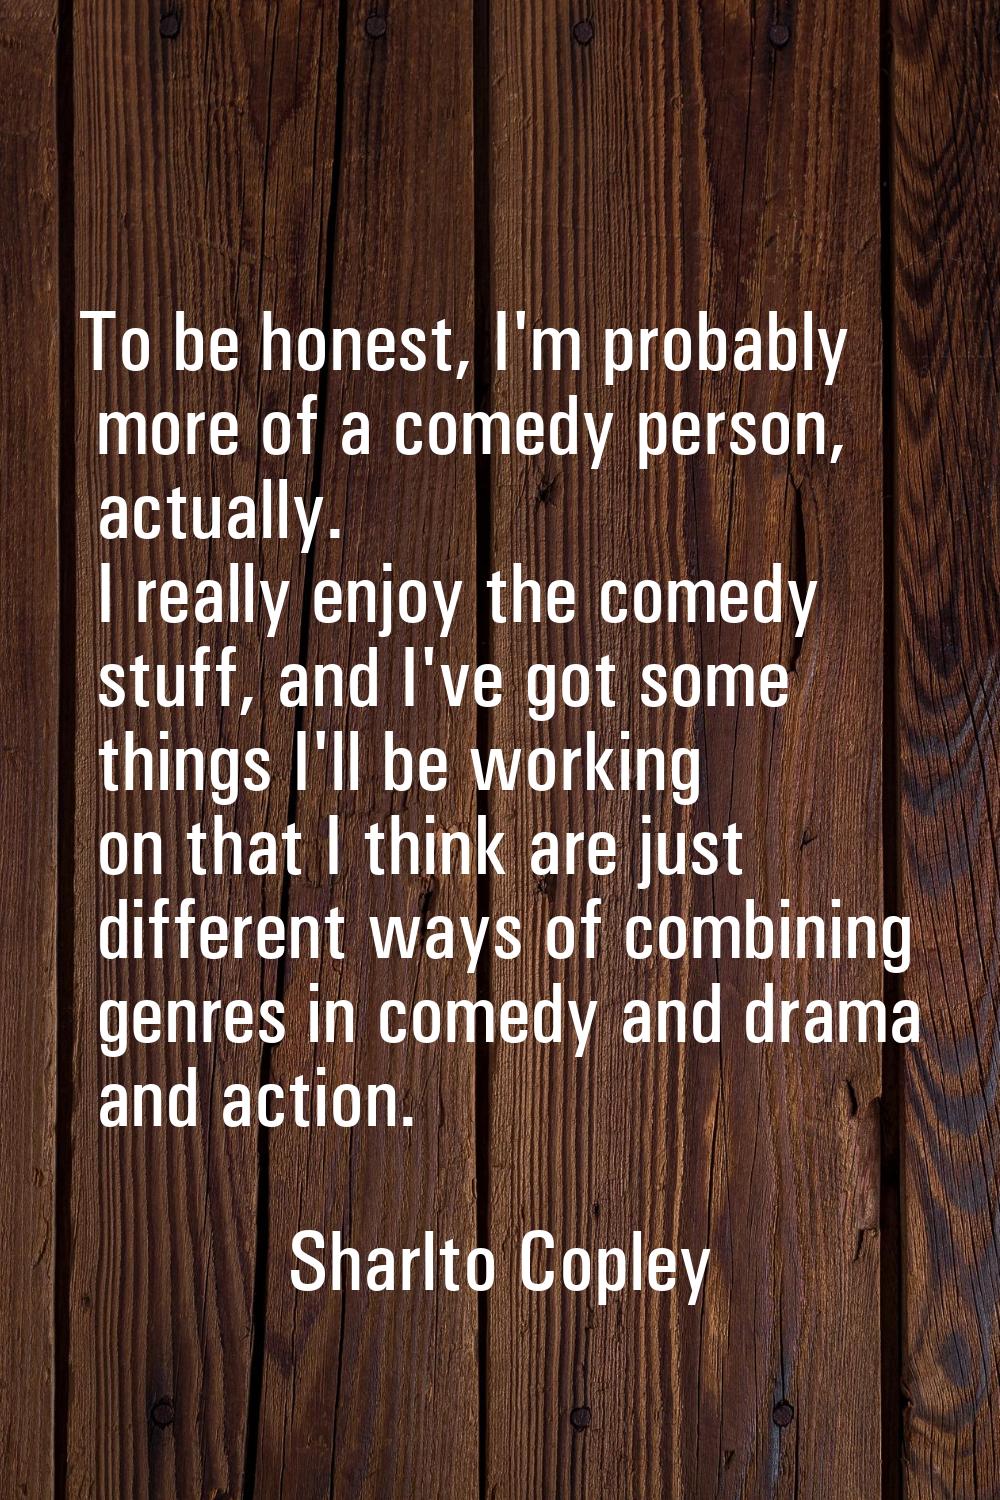 To be honest, I'm probably more of a comedy person, actually. I really enjoy the comedy stuff, and 